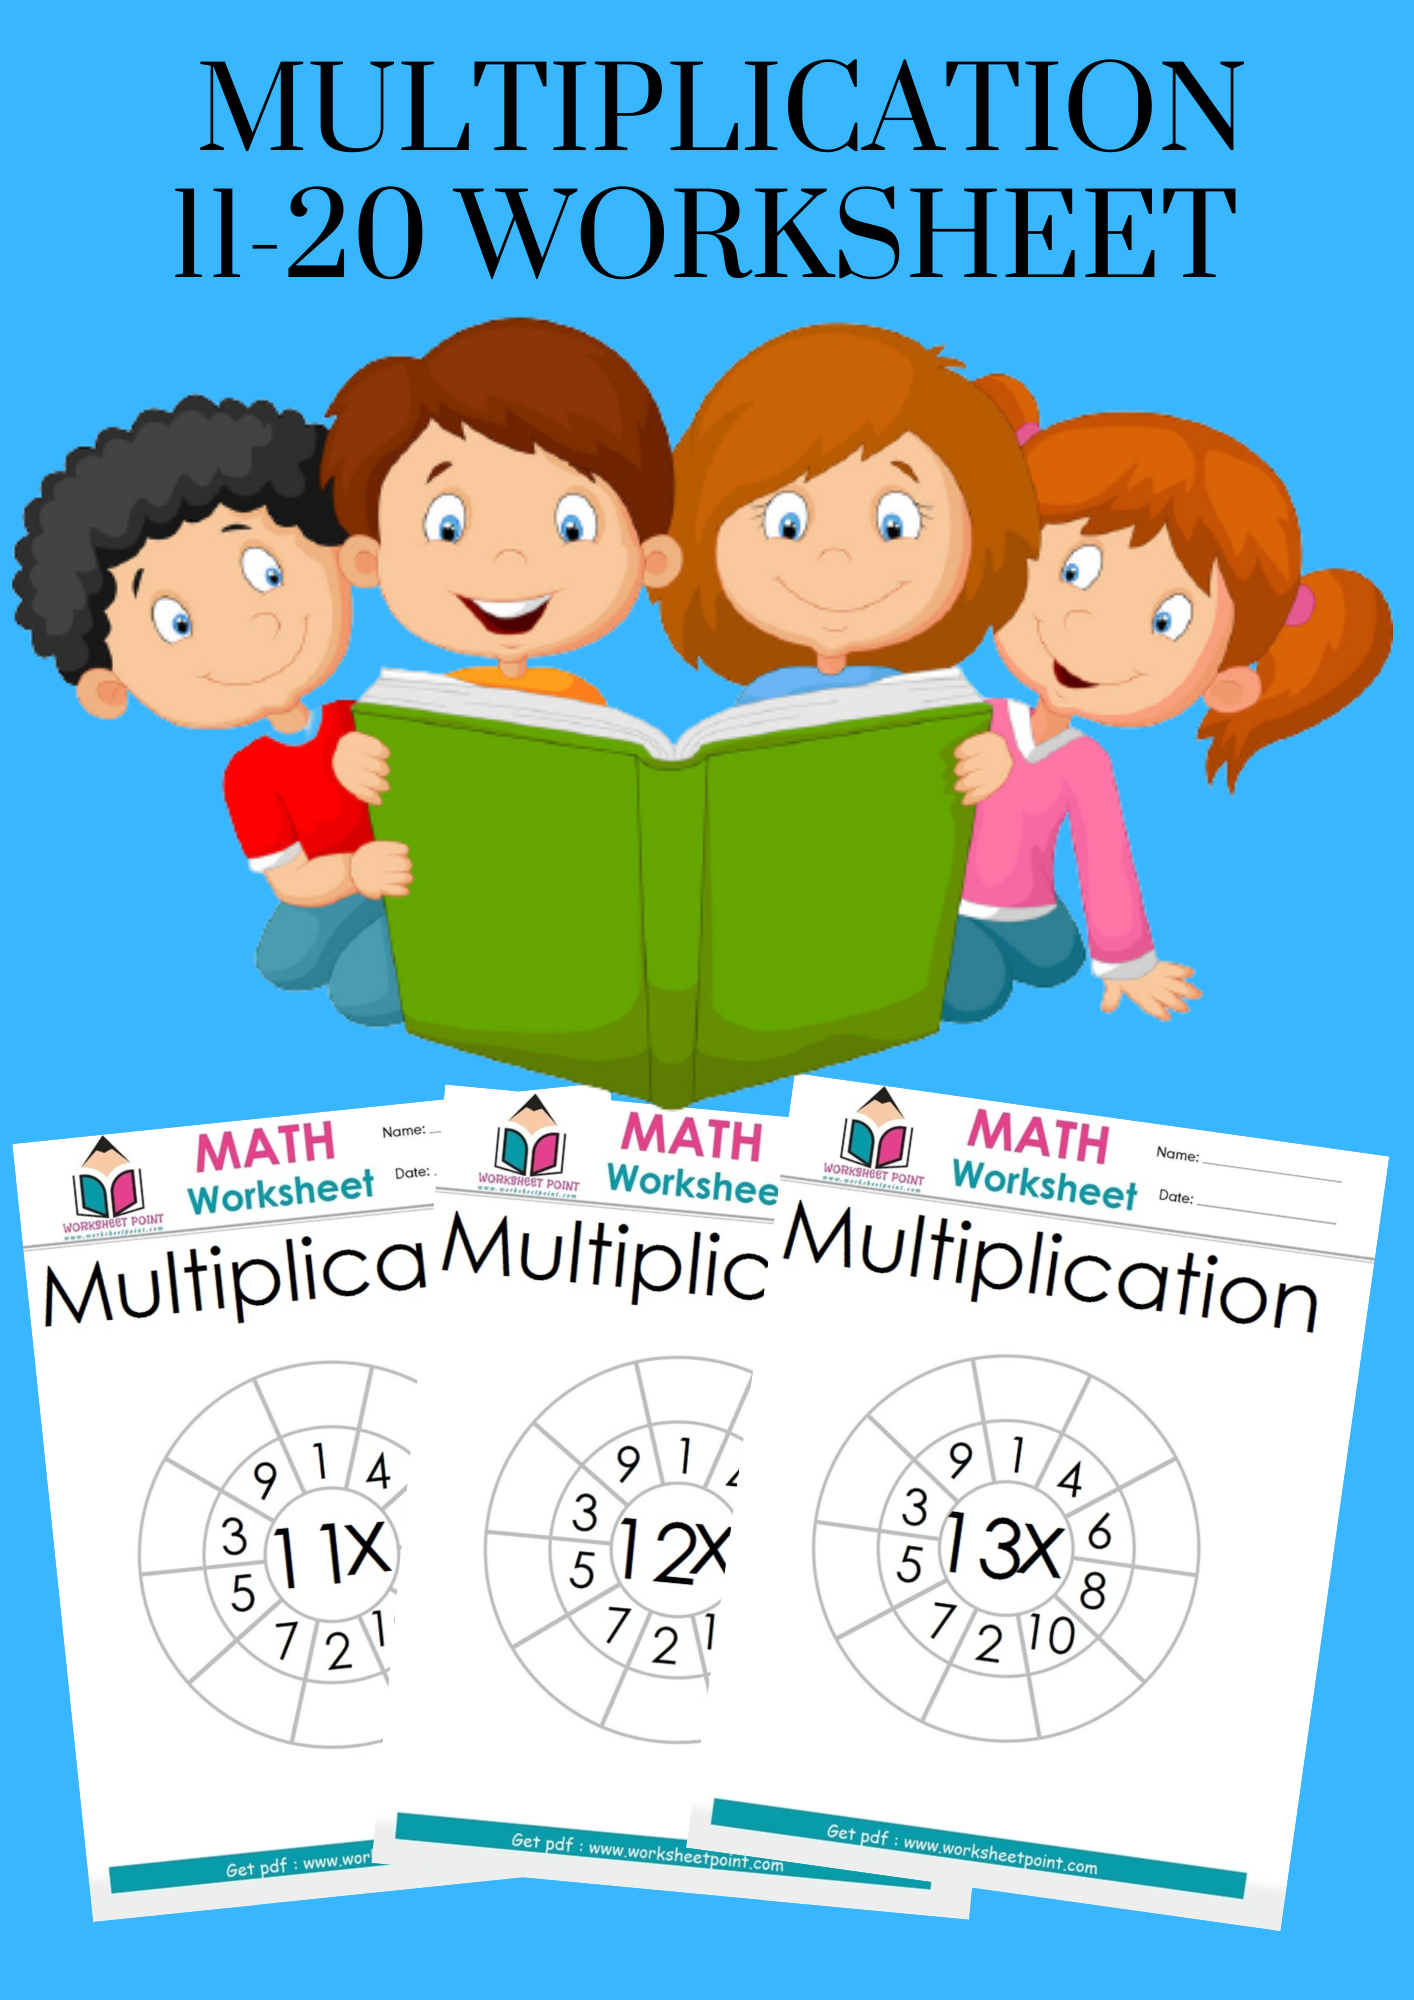 Rich Rusults on Google's SERP when searching for 'Multiplication 11 -20 Math Worksheet'